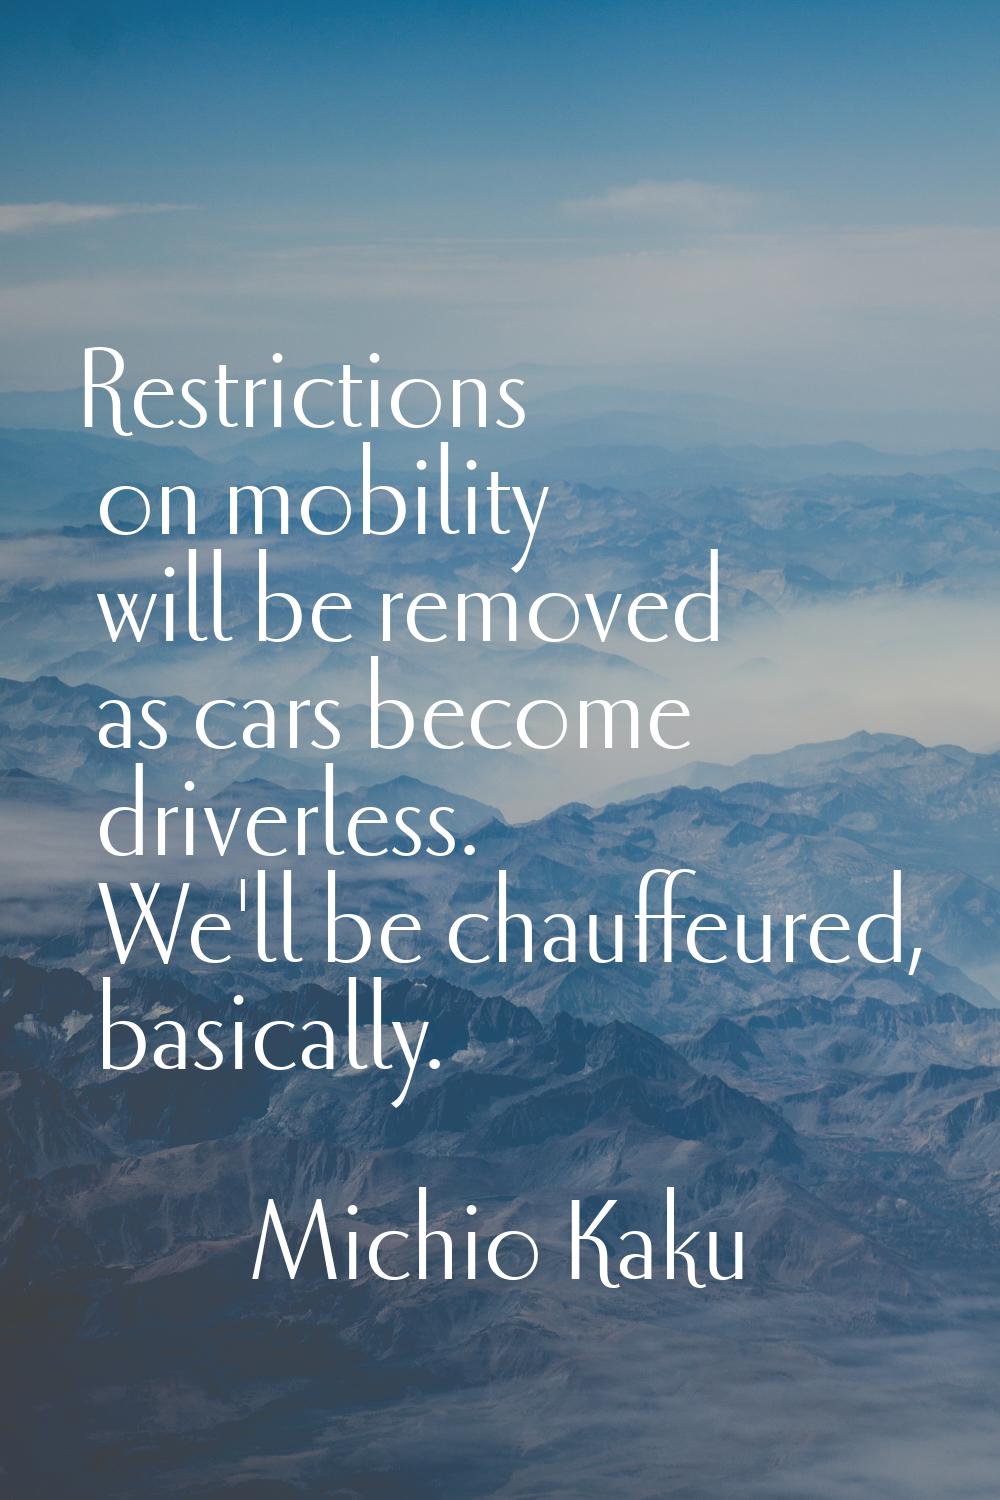 Restrictions on mobility will be removed as cars become driverless. We'll be chauffeured, basically